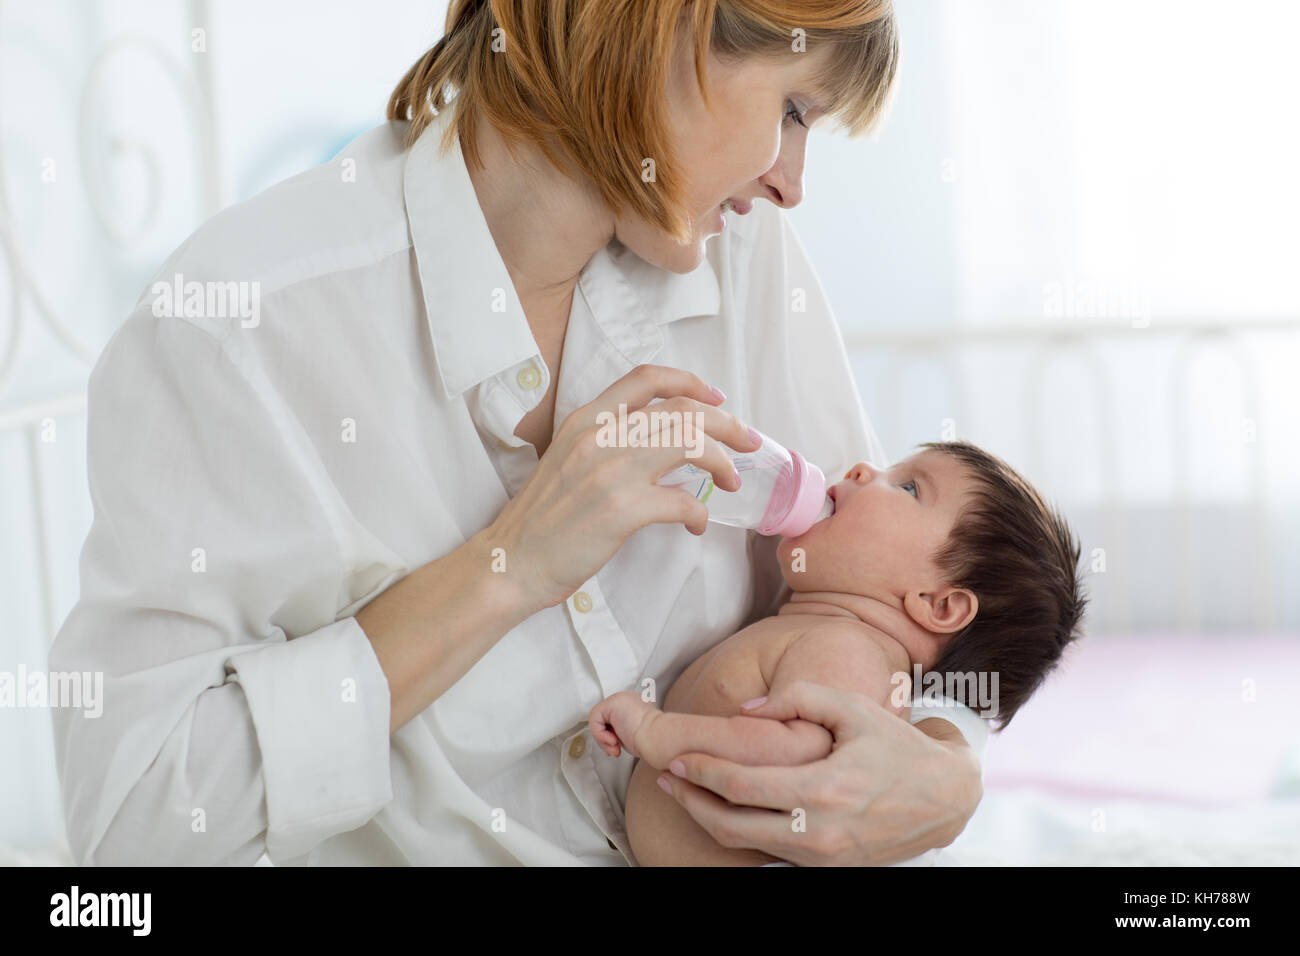 Mom holding and giving water to baby infant from bottle Stock Photo